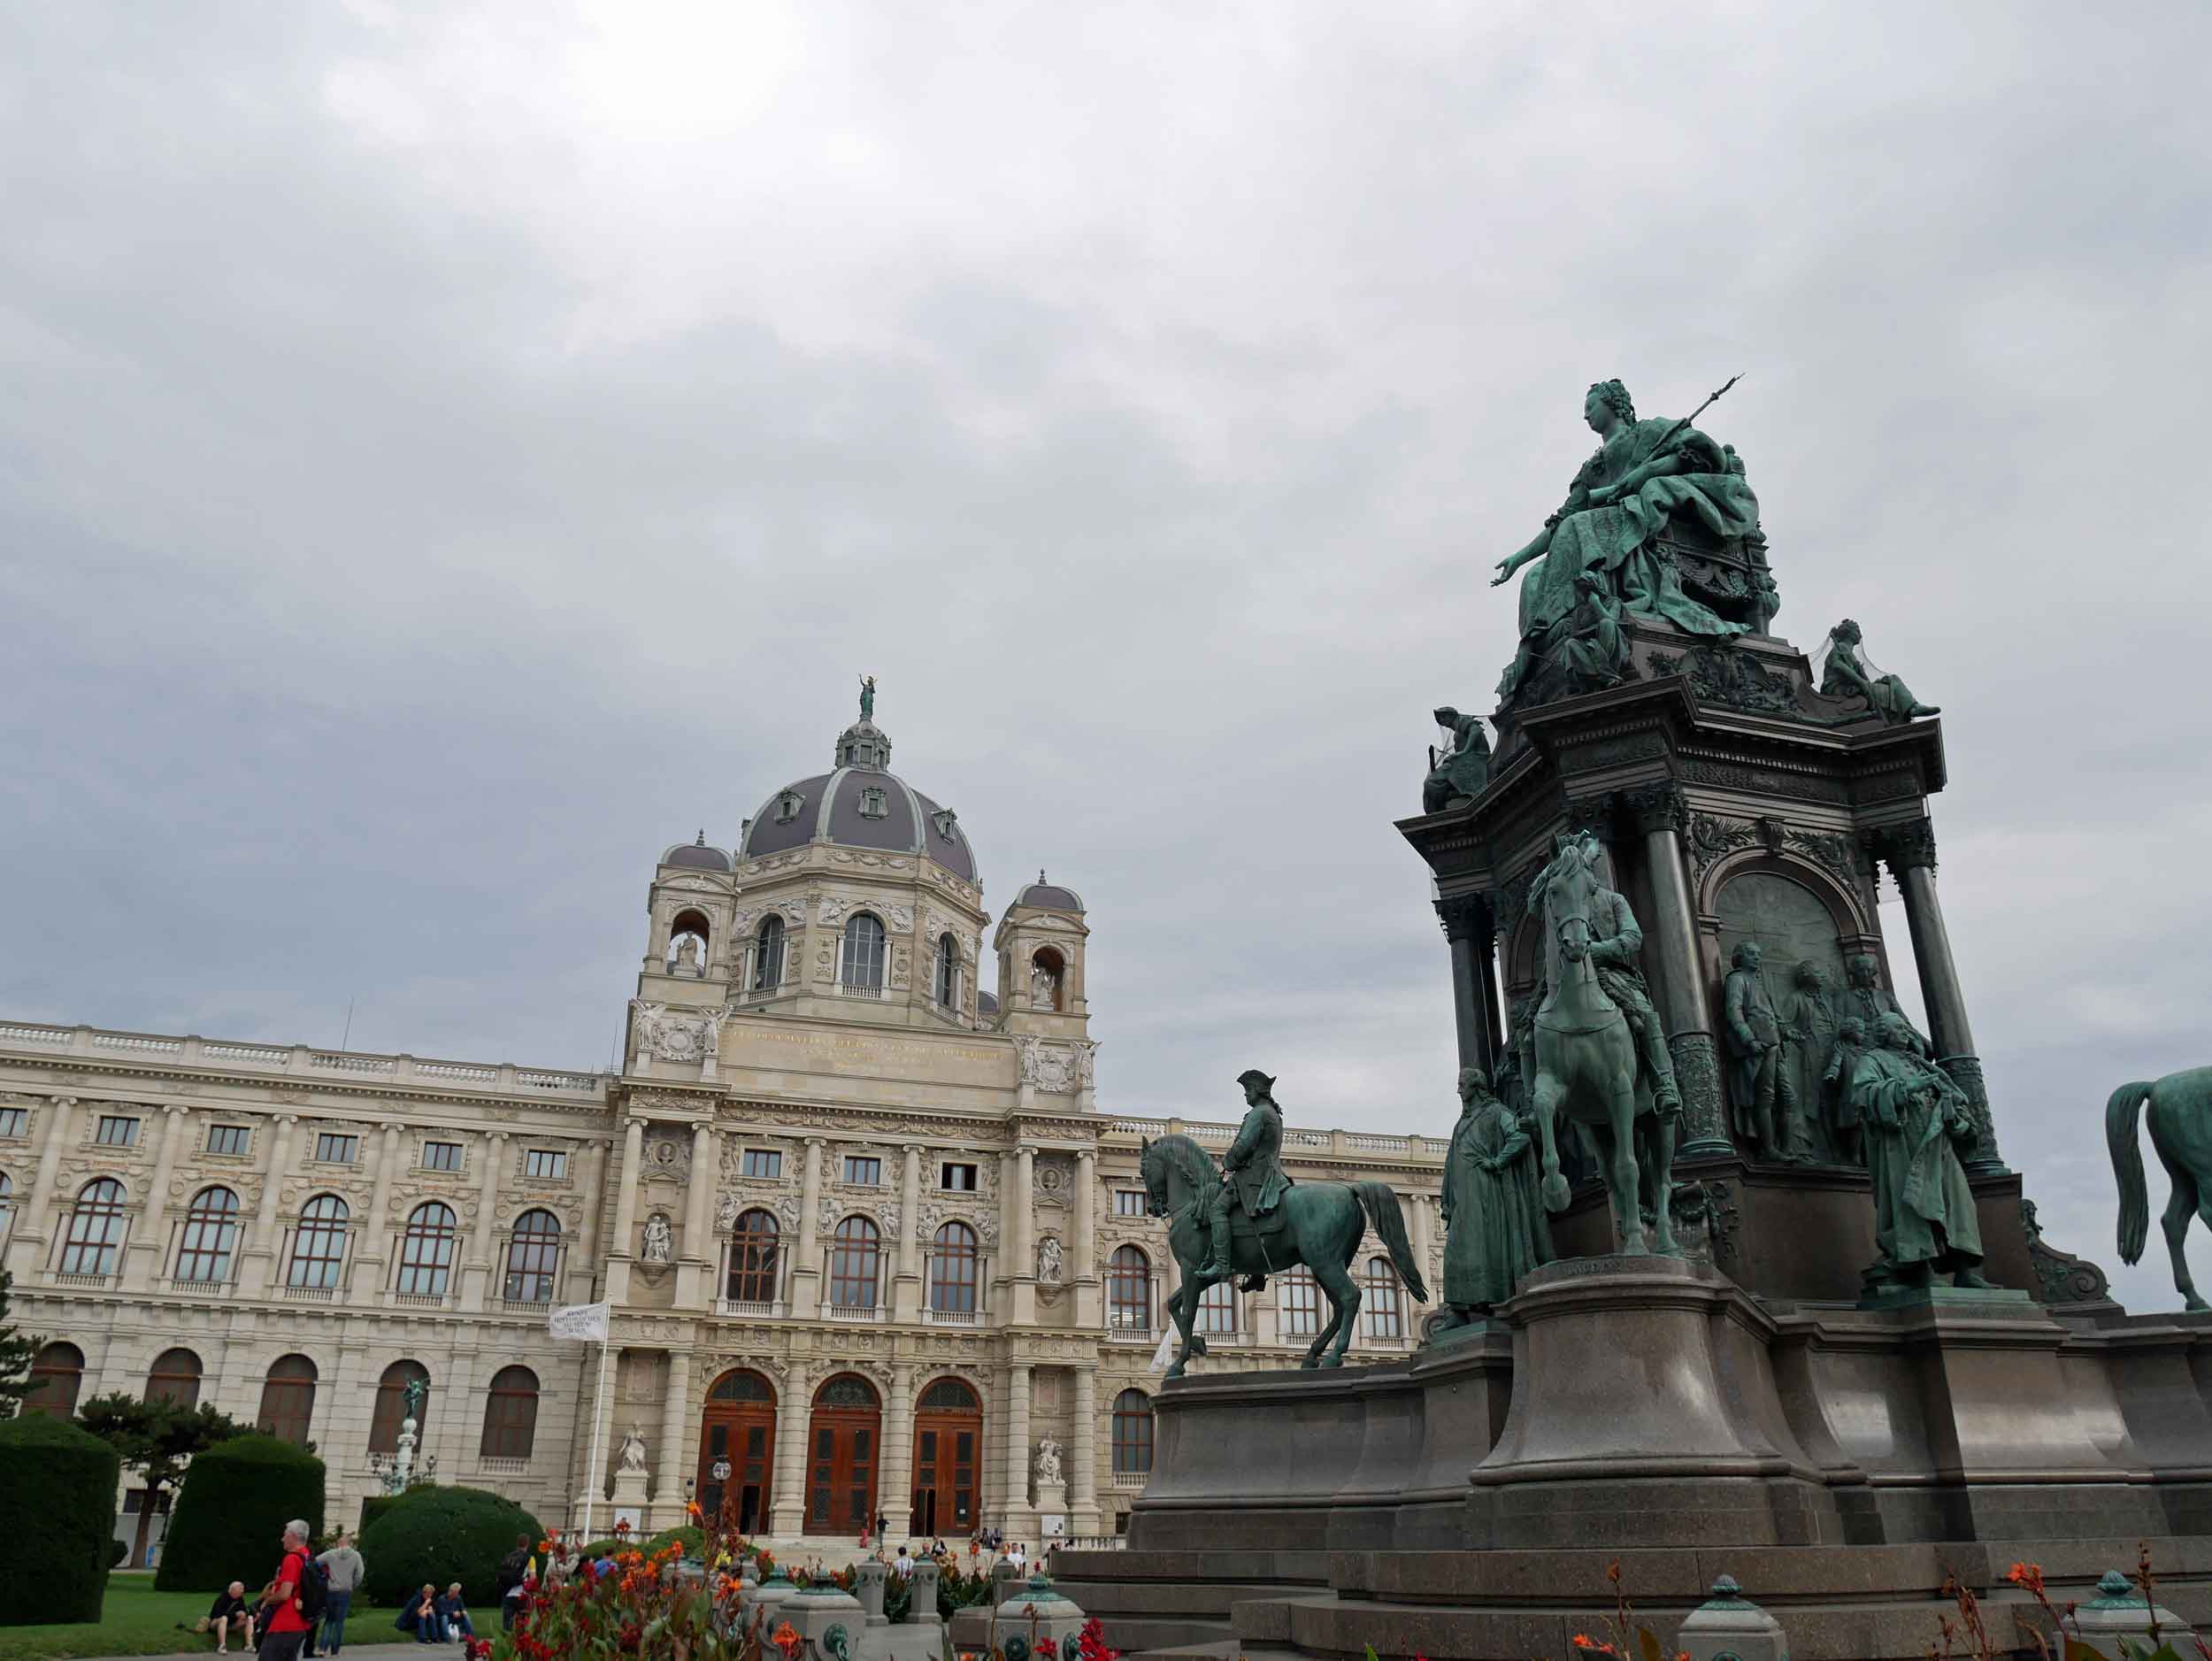  The impressive Museum of Natural History Austria houses some 30 million+ objects 